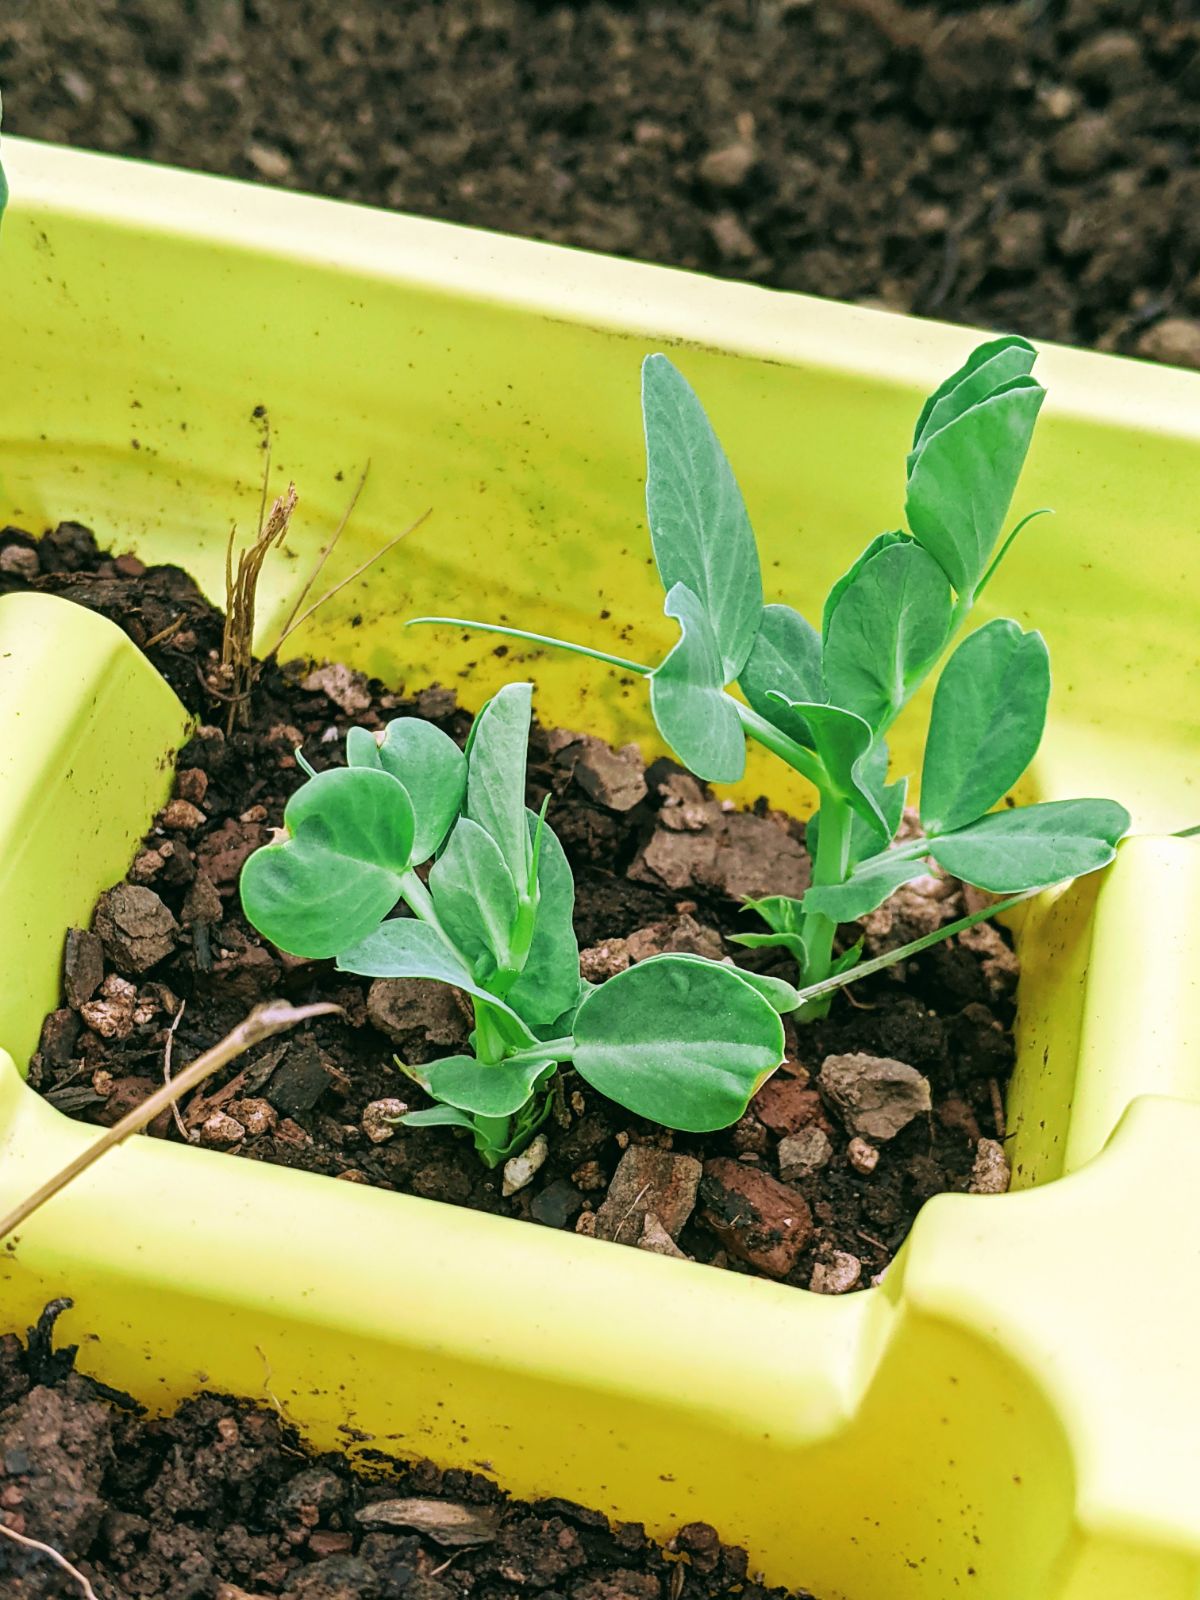 Two snow pea seedlings in a yellow plant tray